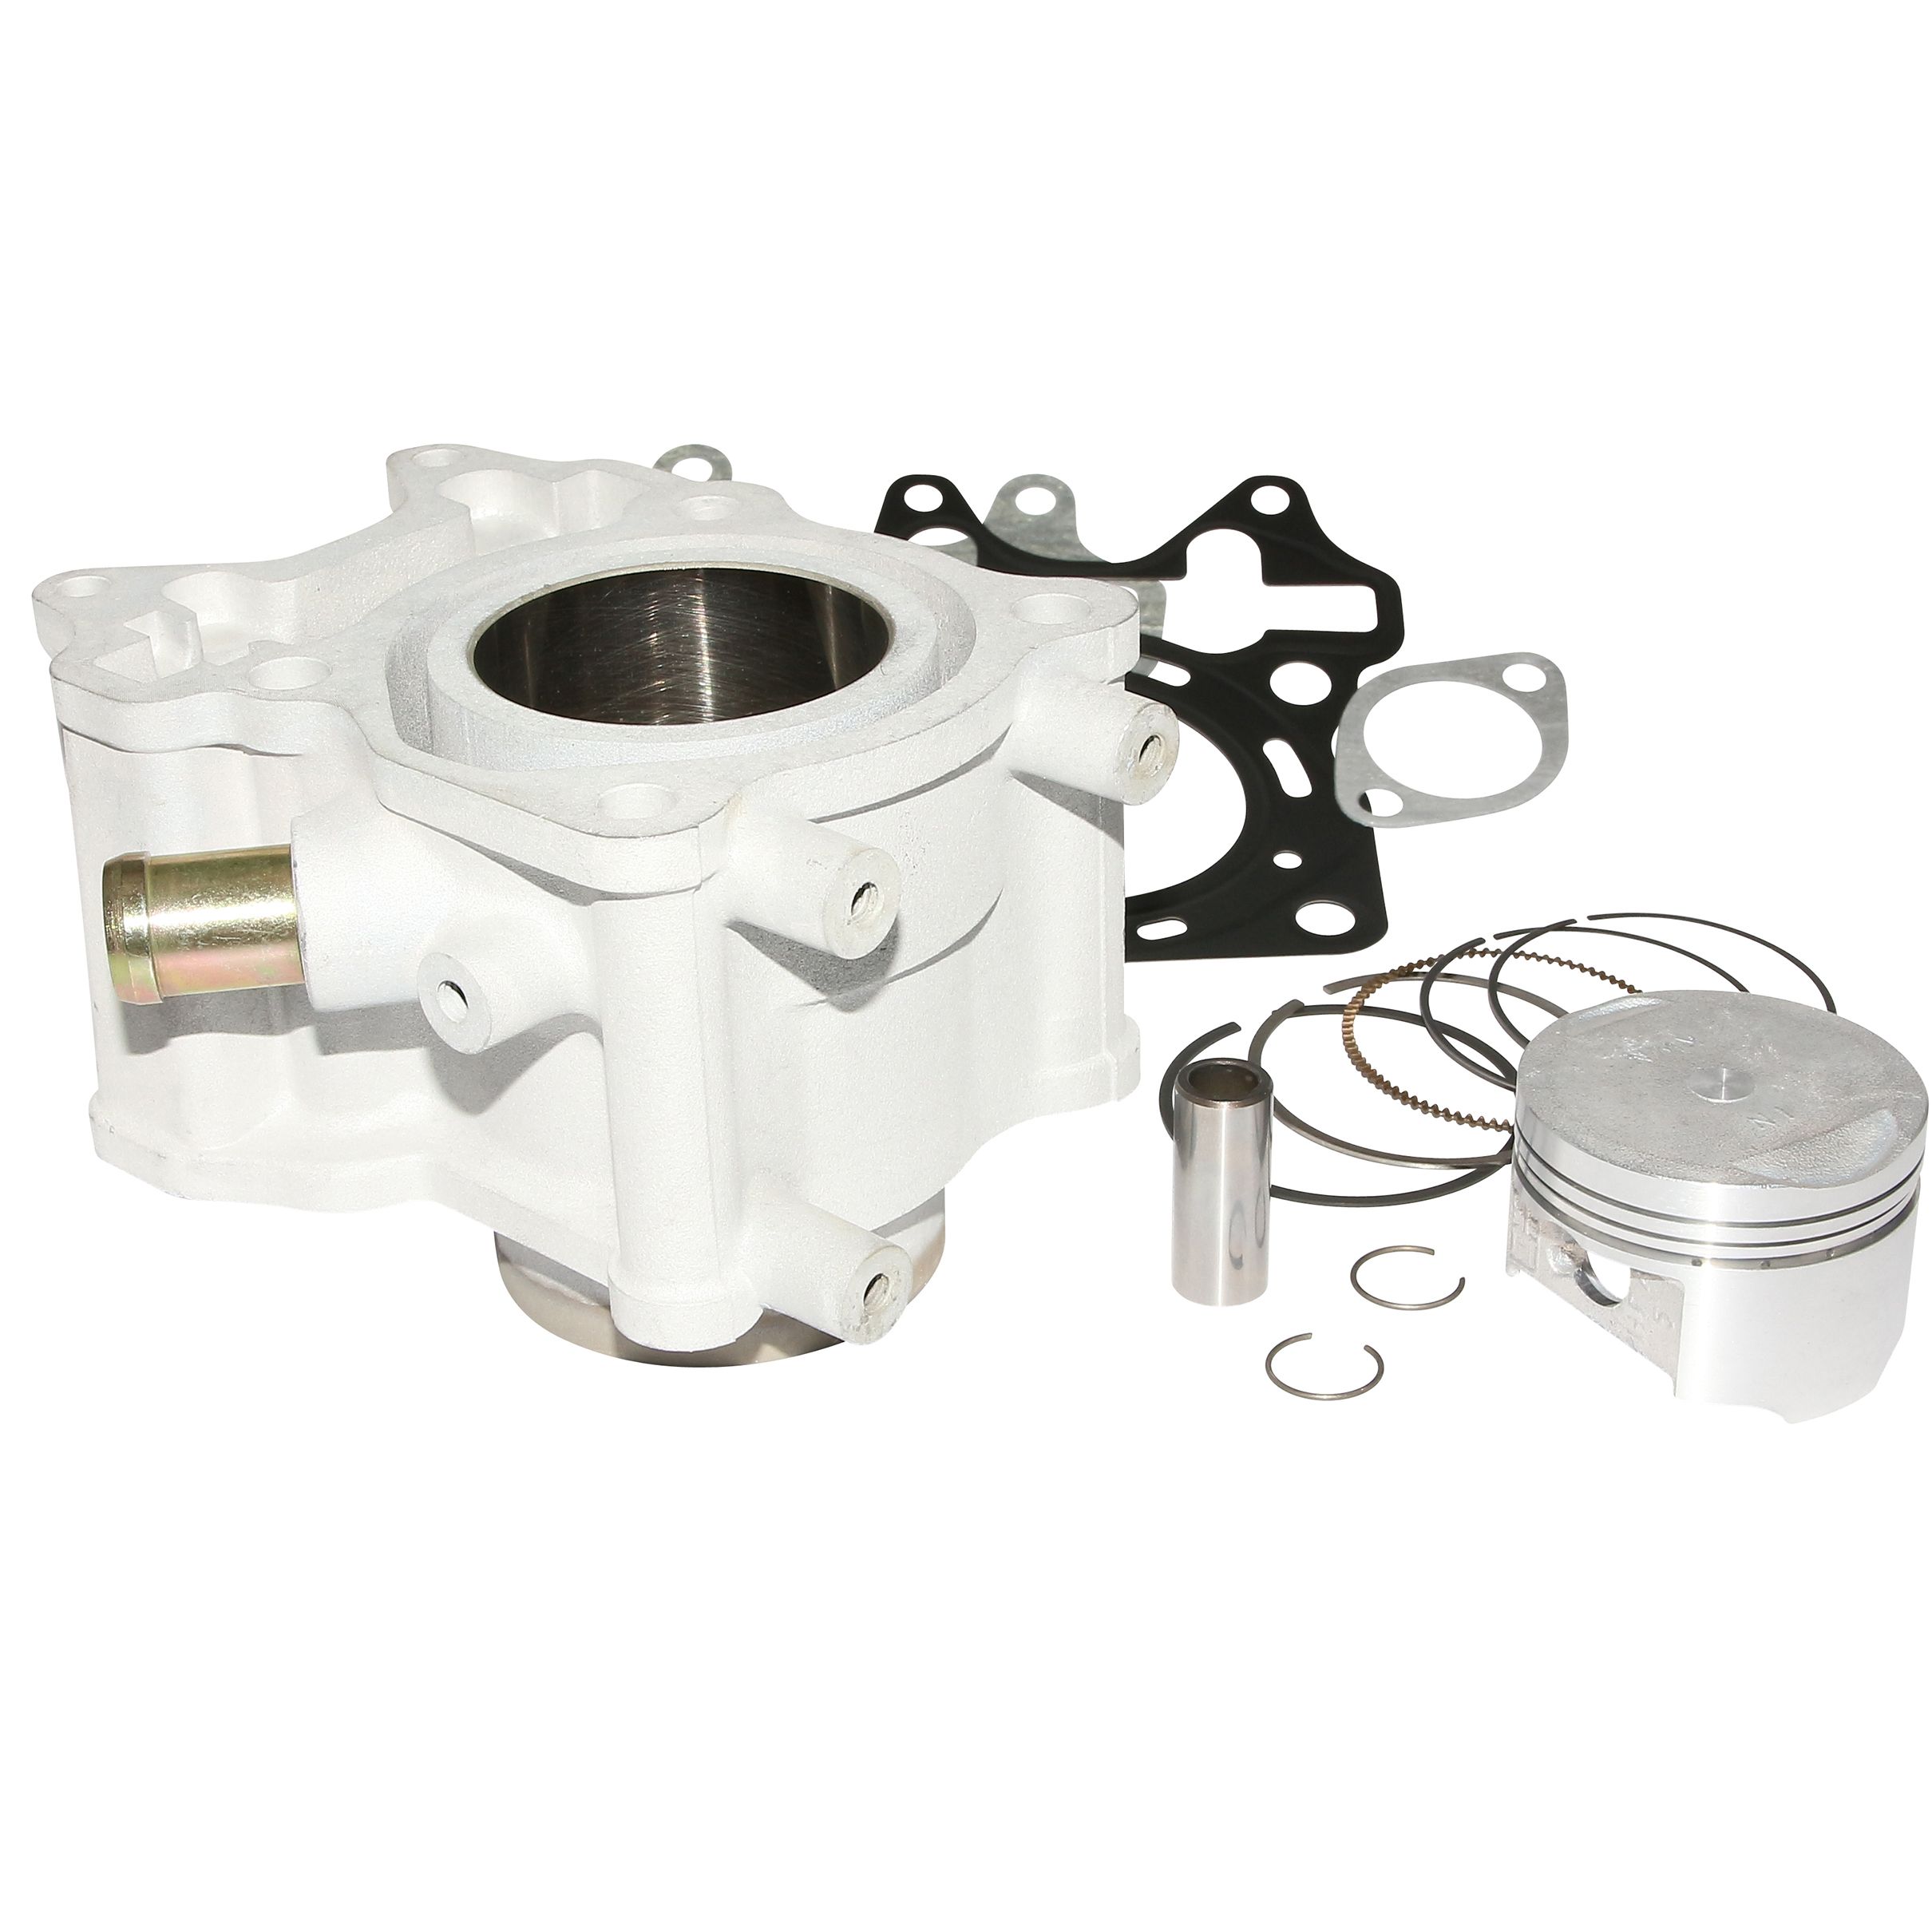 Image of Kit cylindre-piston Airsal adaptable diam 52.4 mm